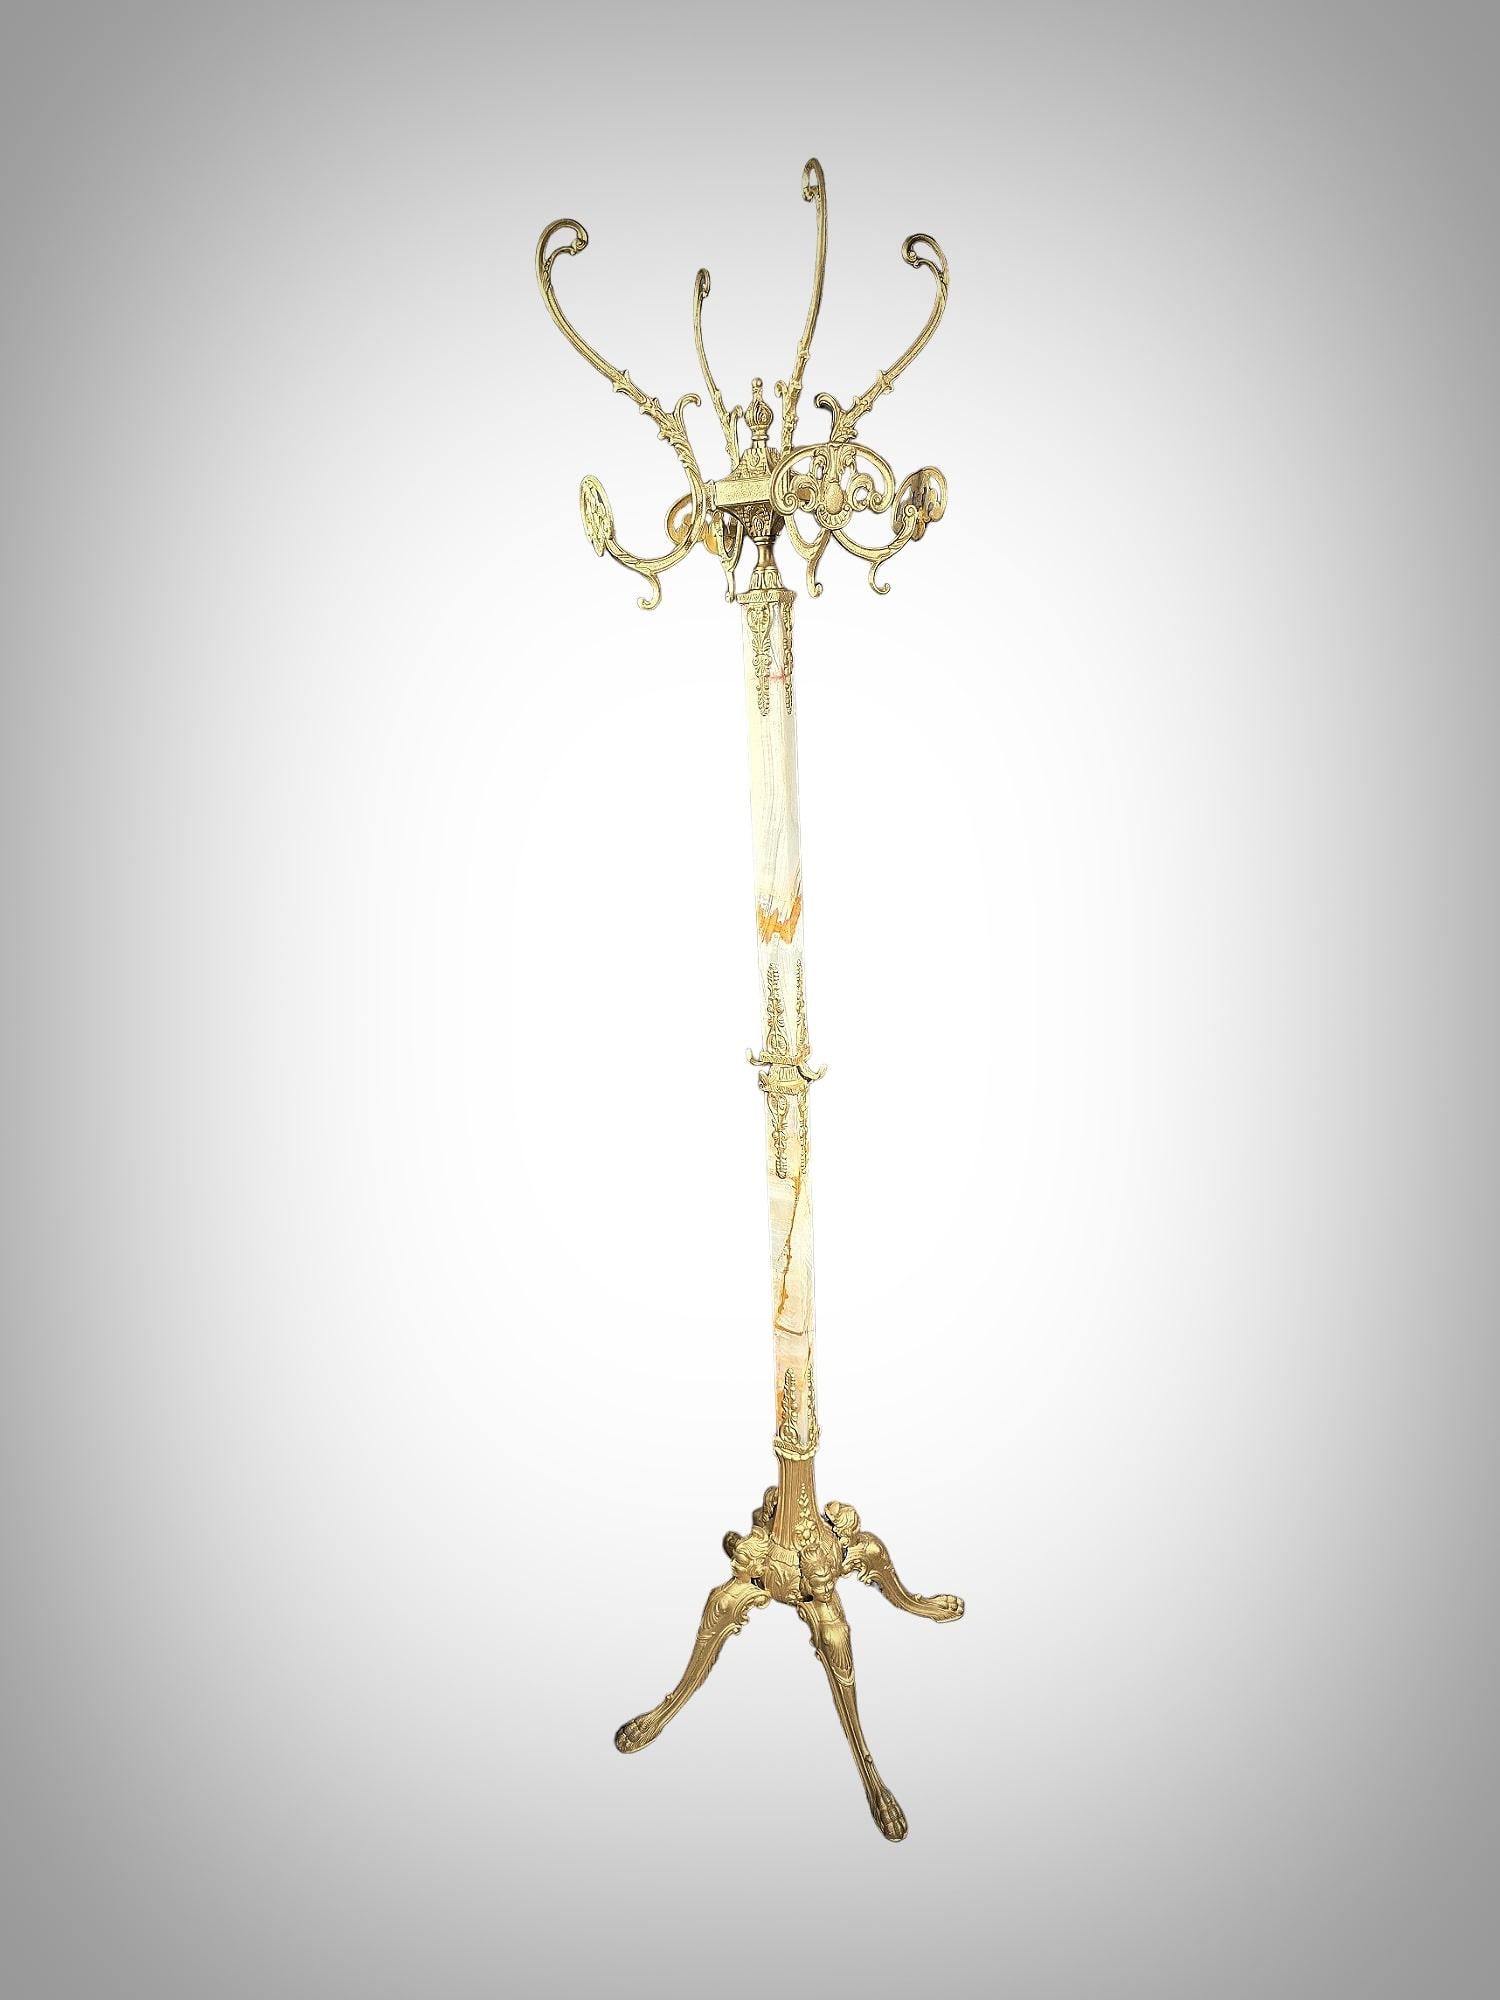 Art Nouveau Onyx Coat Rack, Circa 1900 In Good Condition For Sale In Madrid, ES